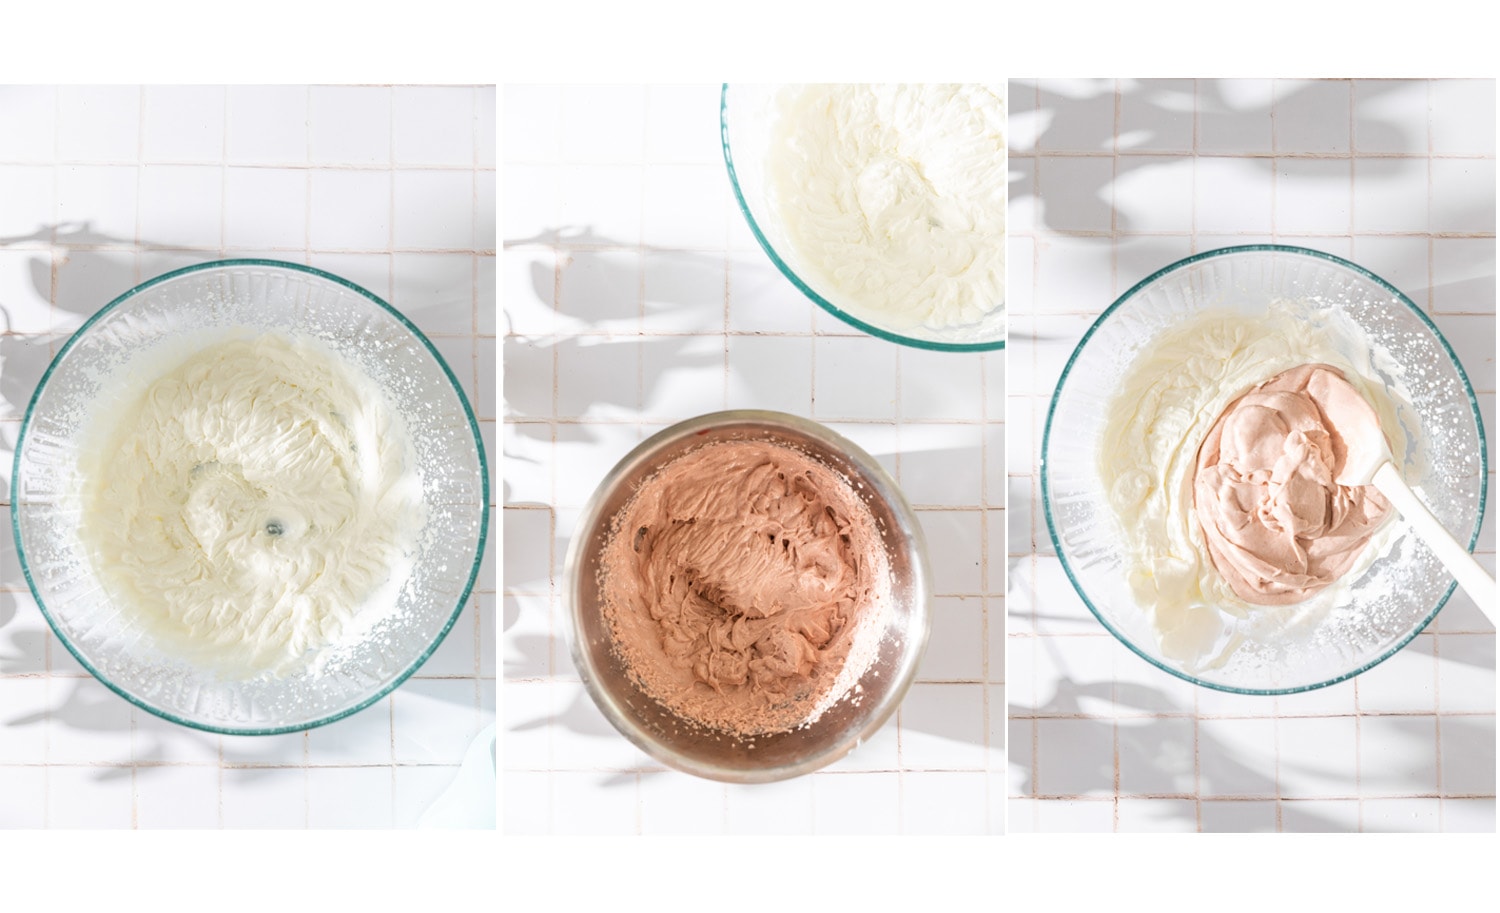 process images showing the final steps of making strawberry bavarian cream.